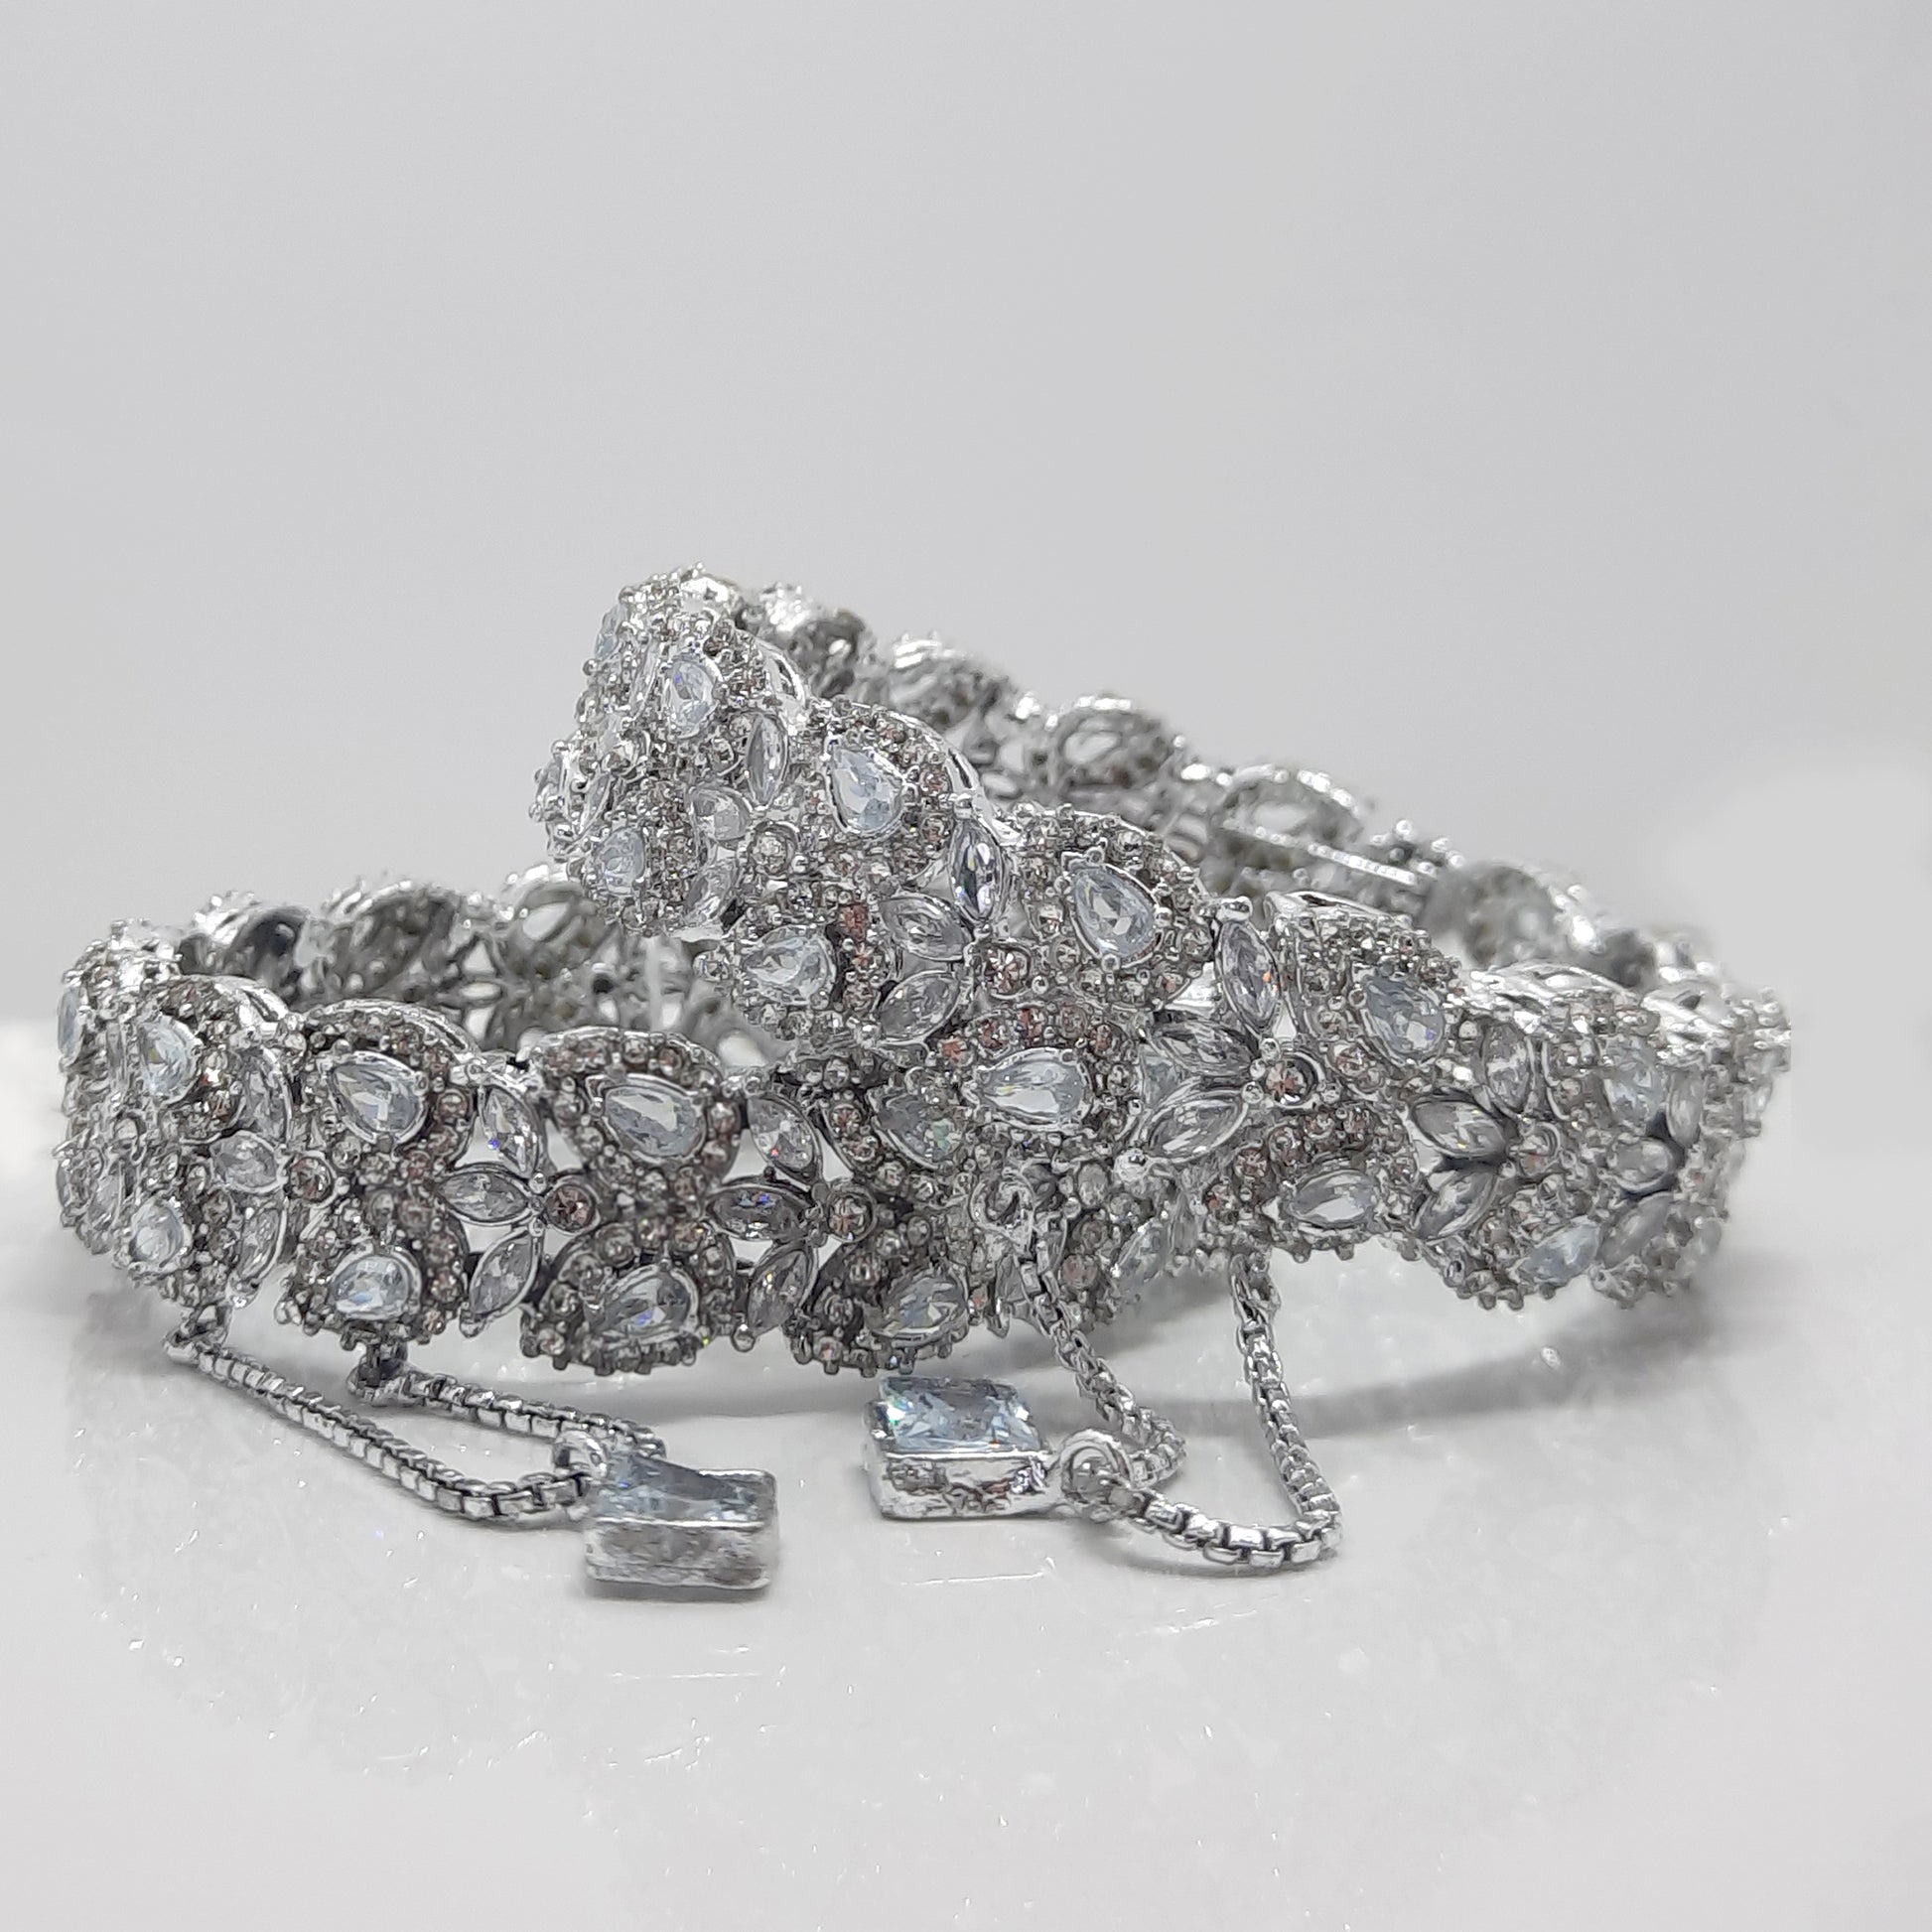 Image of (Snowy Elegance) from an exquisite collection by Al Musk Jewellery.